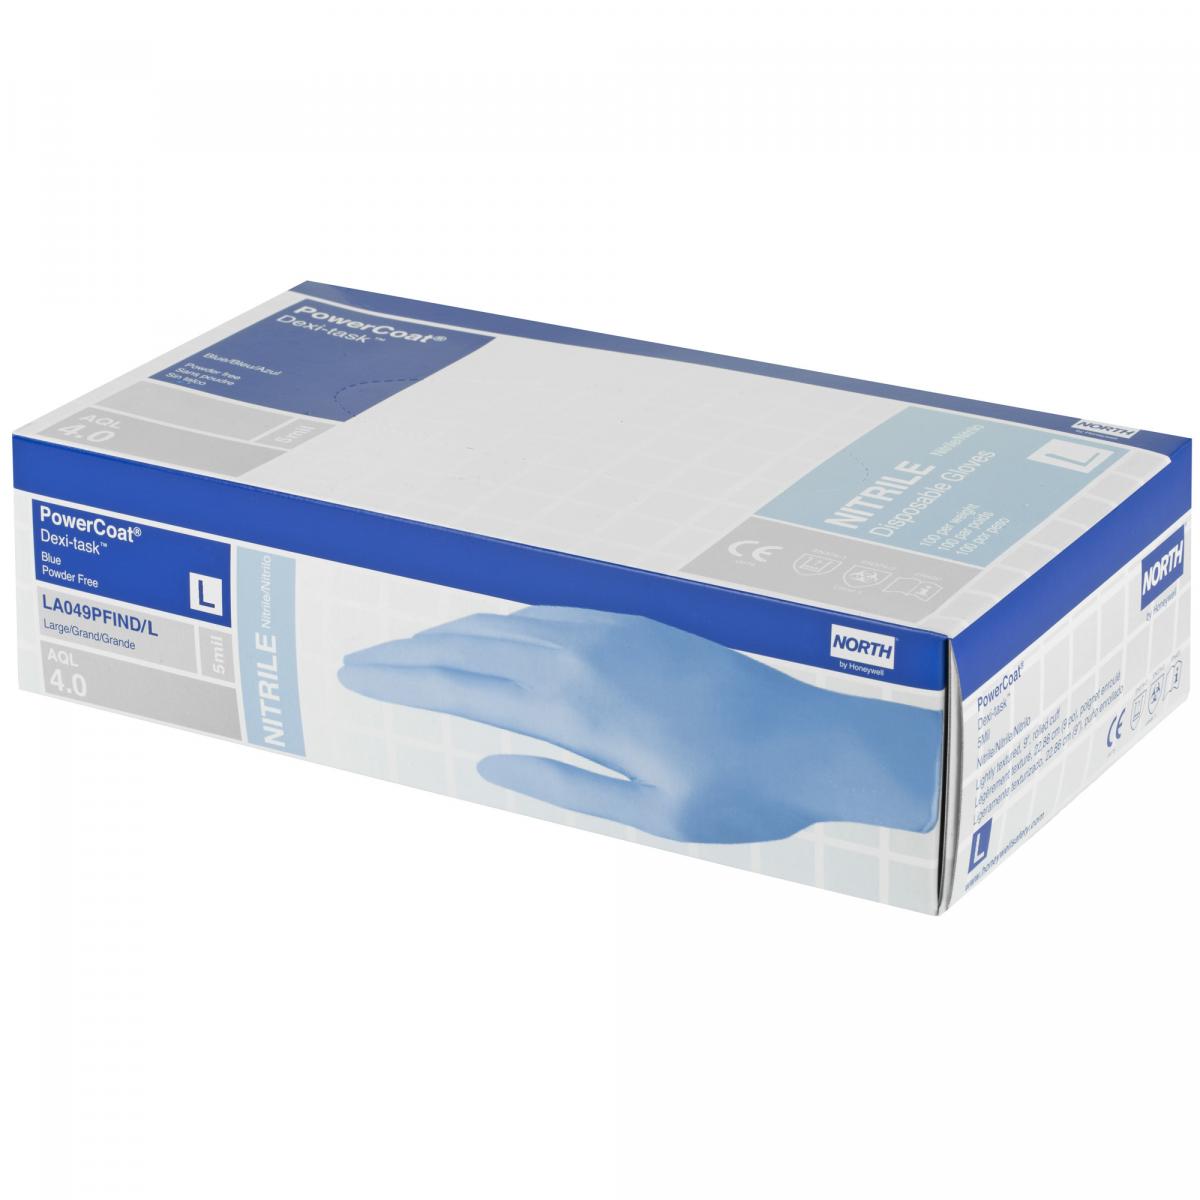 NORTH Disposable Gloves Large Blue 100Pk - 4Shooters